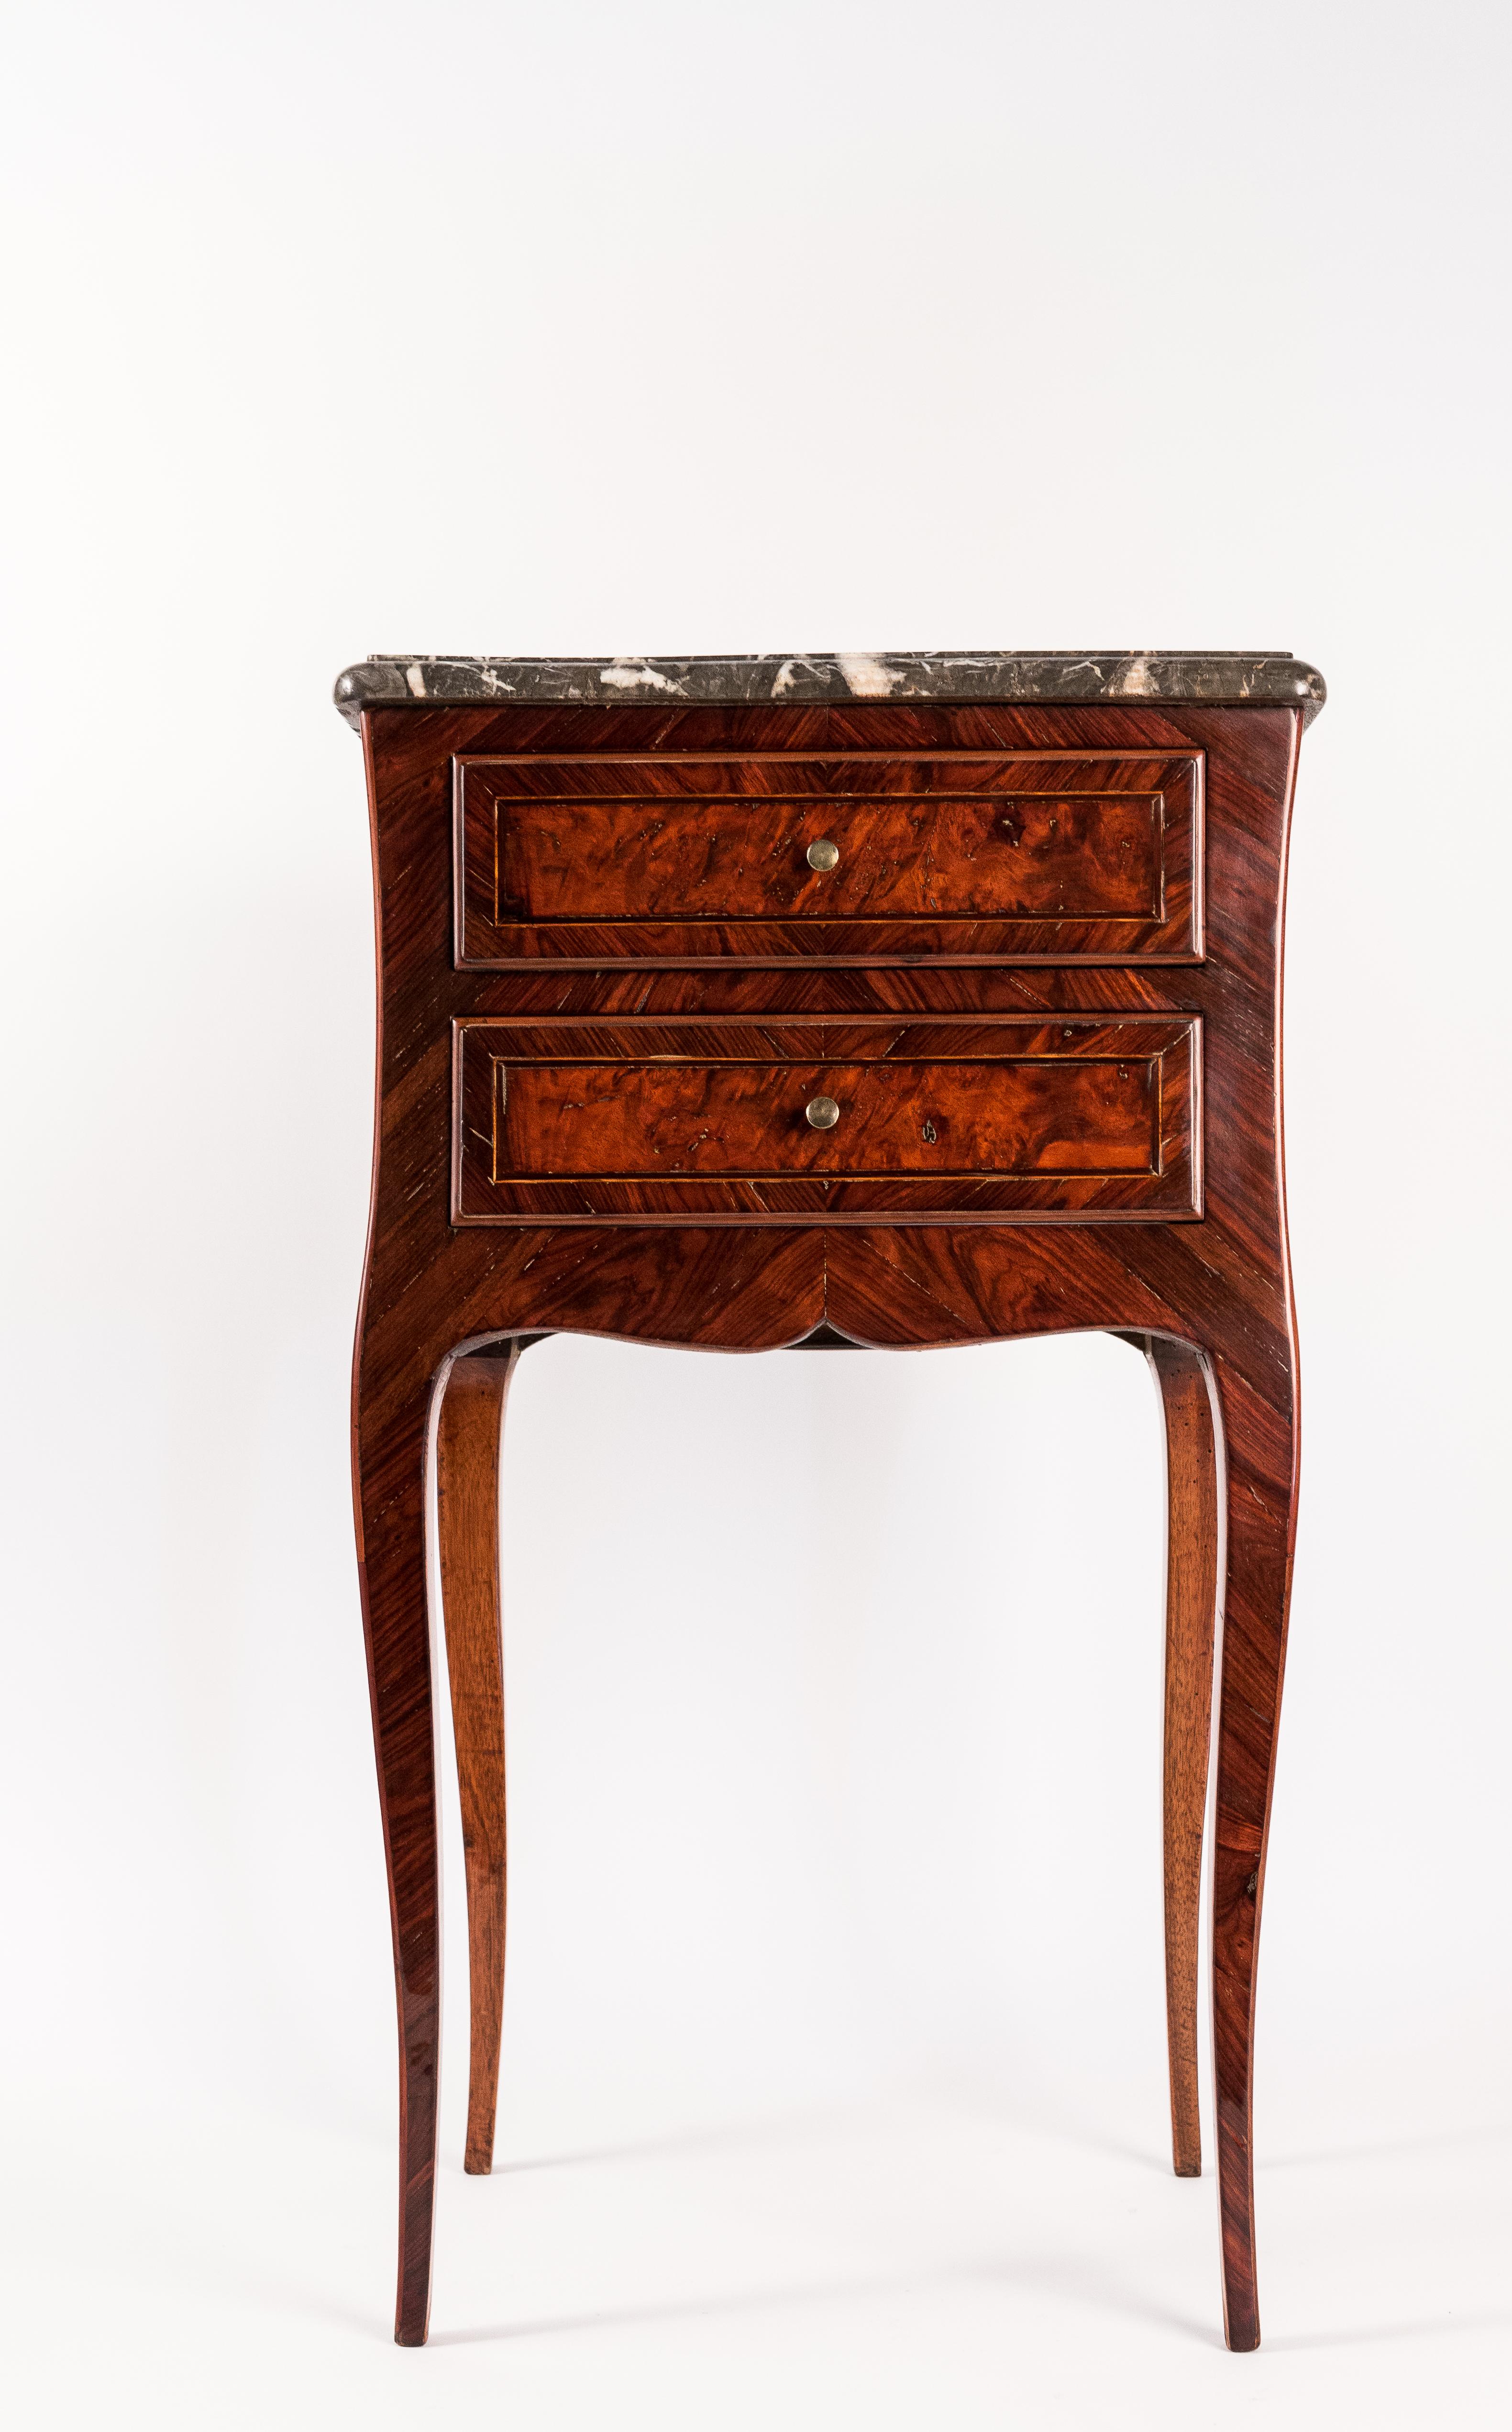 French Louis XV style small Serpentine marble-top commode, circa 1820-1830.

A lovely and decorative small commode in Kingwood and Amboyna. It opens by two drawers and rests on elegant cabriole legs, with 